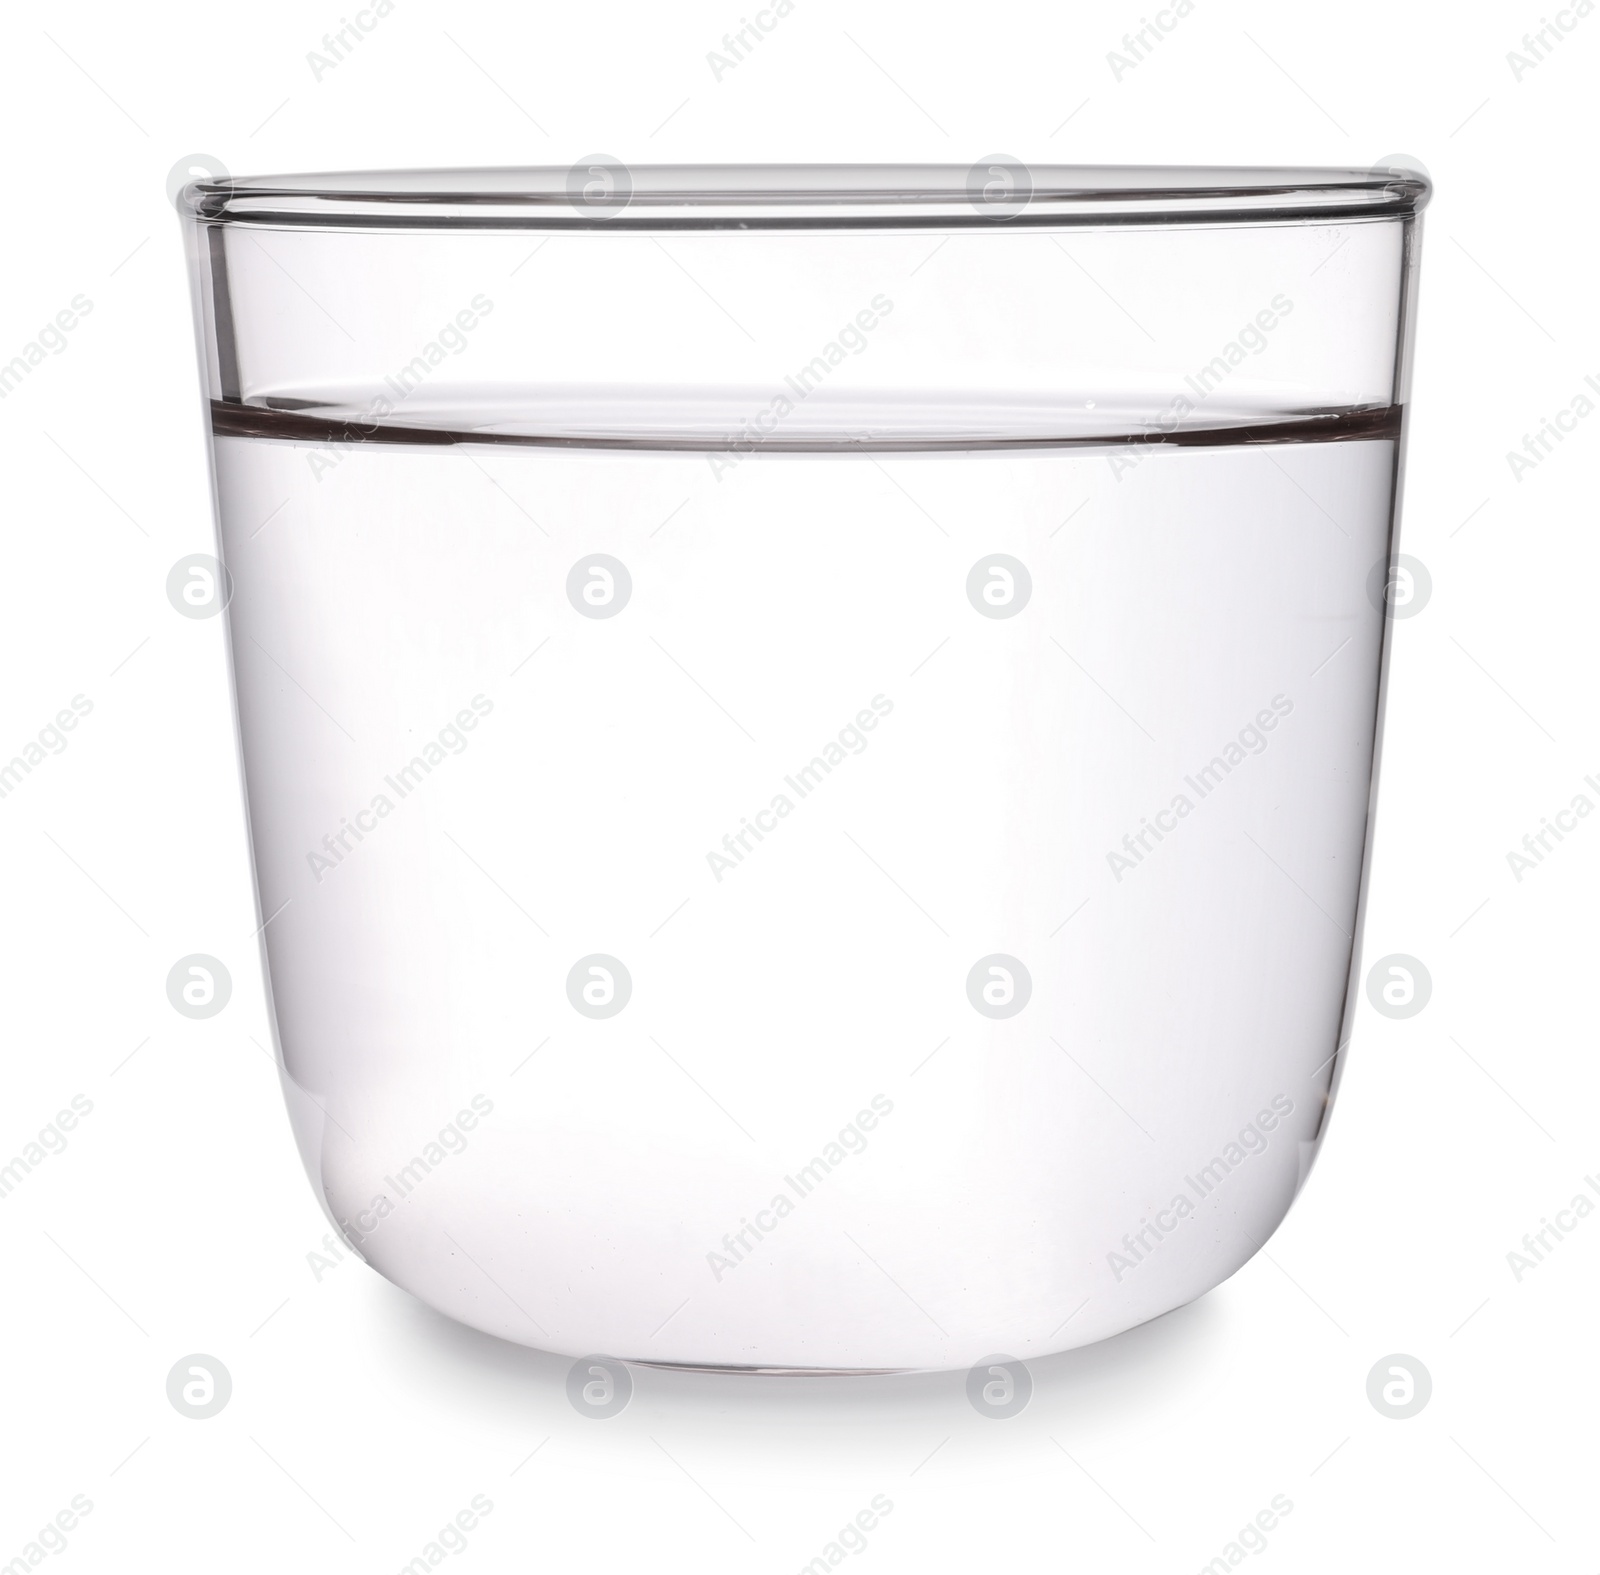 Photo of Glass of clean water isolated on white